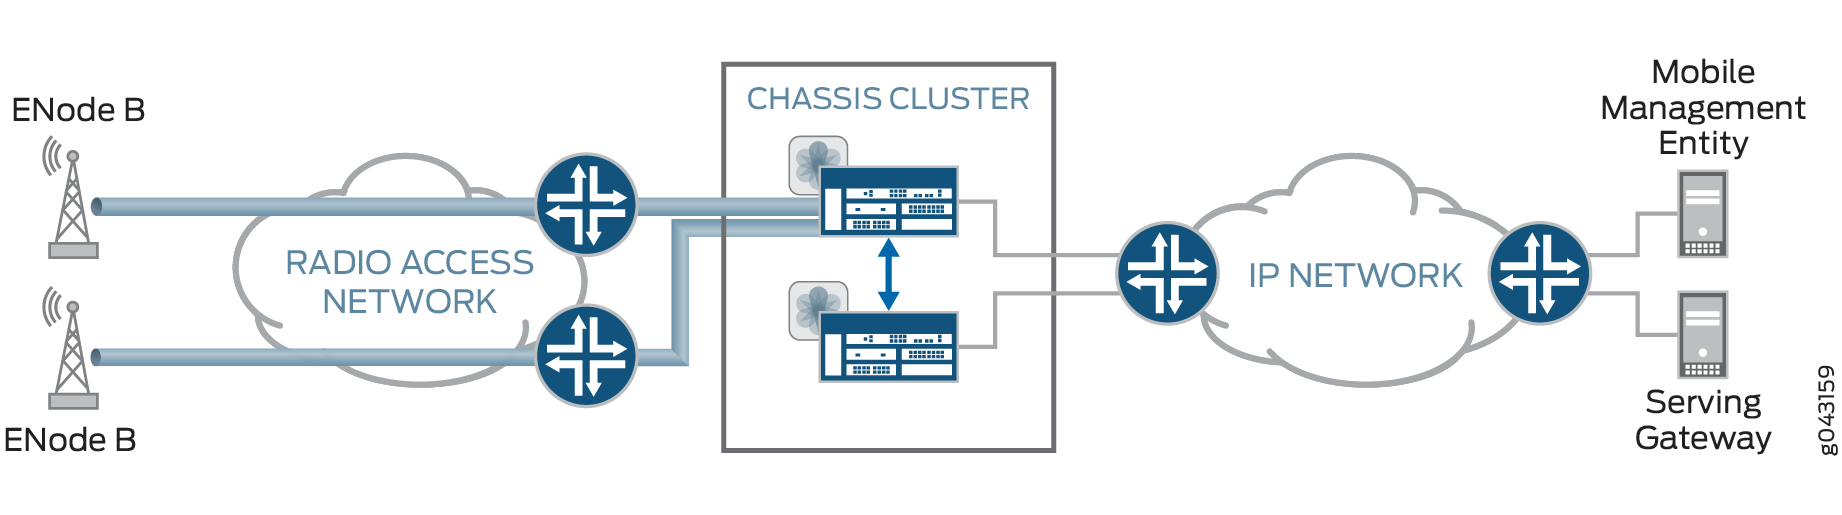 Active/Passive Chassis Cluster with IPsec VPN Tunnels